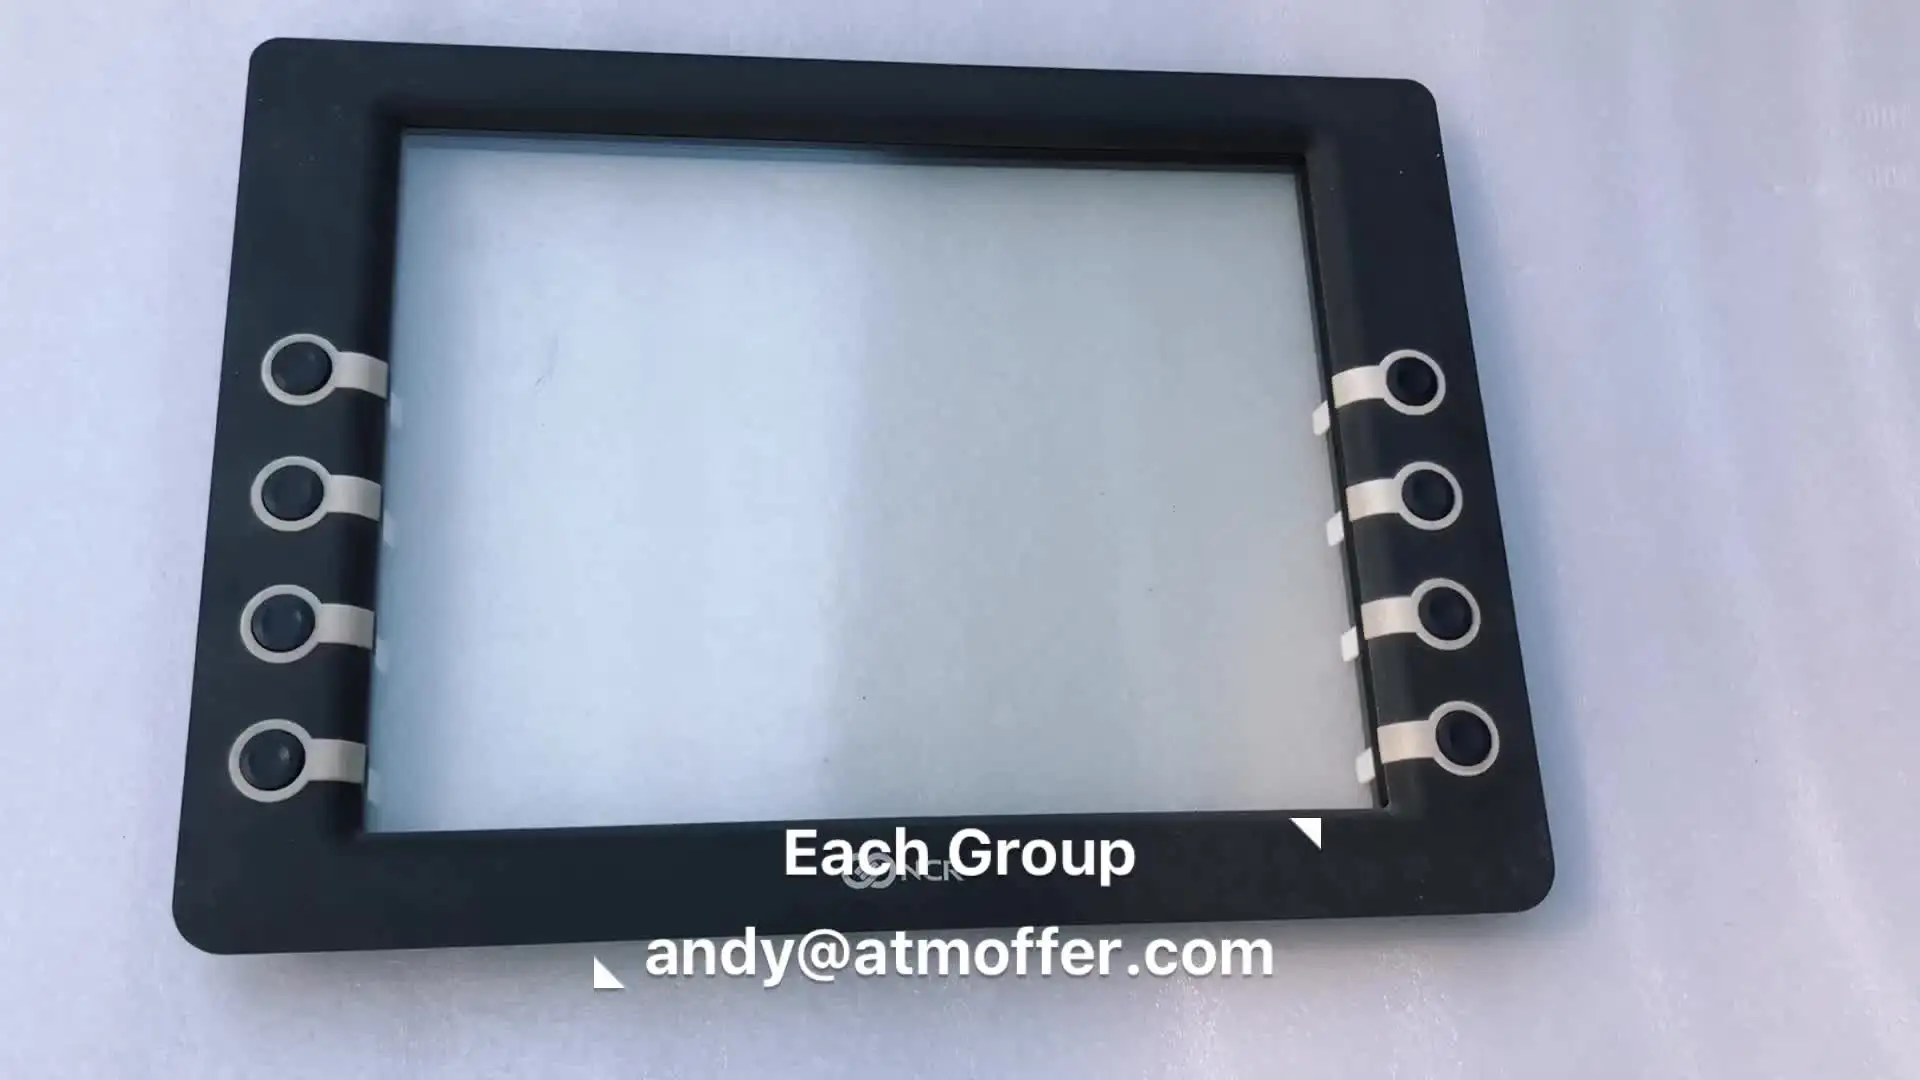 ATM Parts NCR 6625 66XX 15 Inch FDK Assy A / G 4450711367 445-0711367 atm machine parts atm bezel overlay ncr skimmer anti skimming